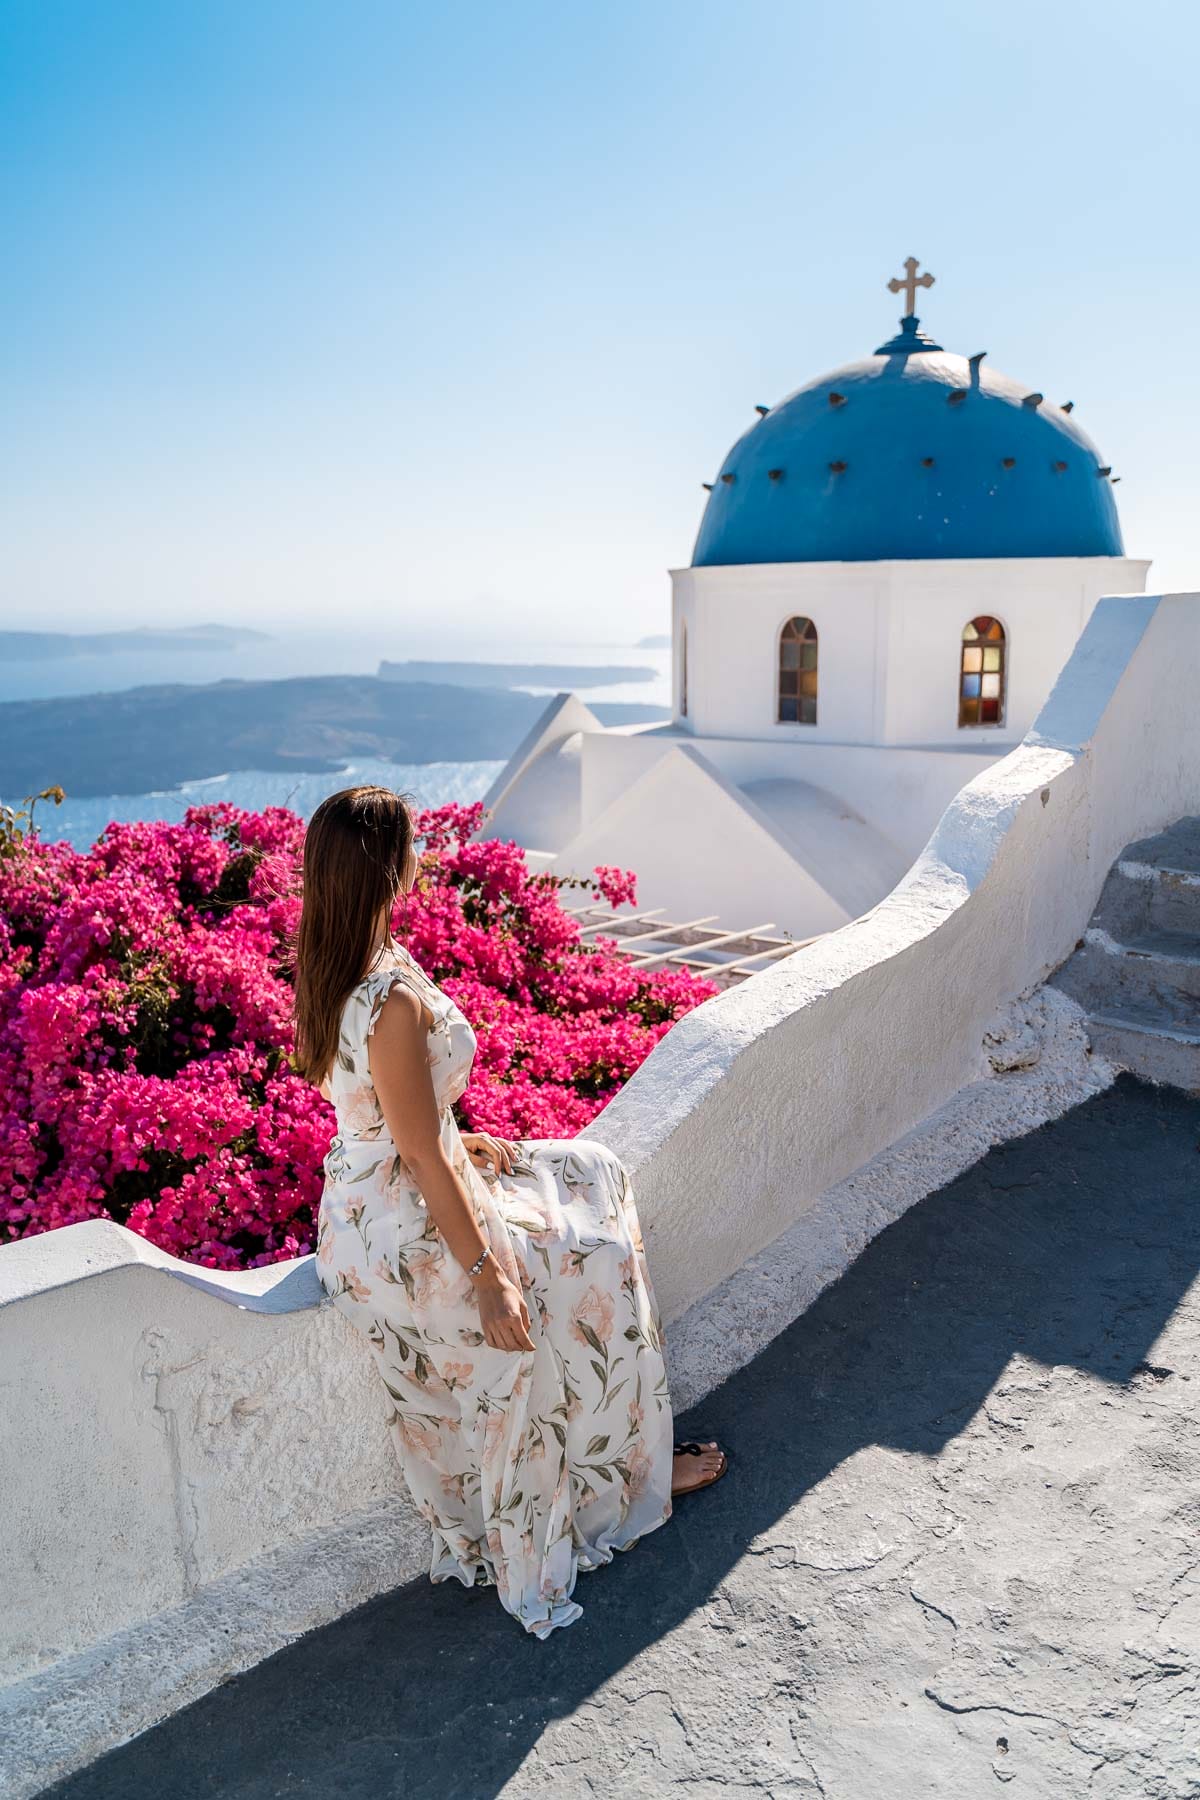 Girl in a floral dress sitting in front of a blue domed church in Imerovigli, Santorini